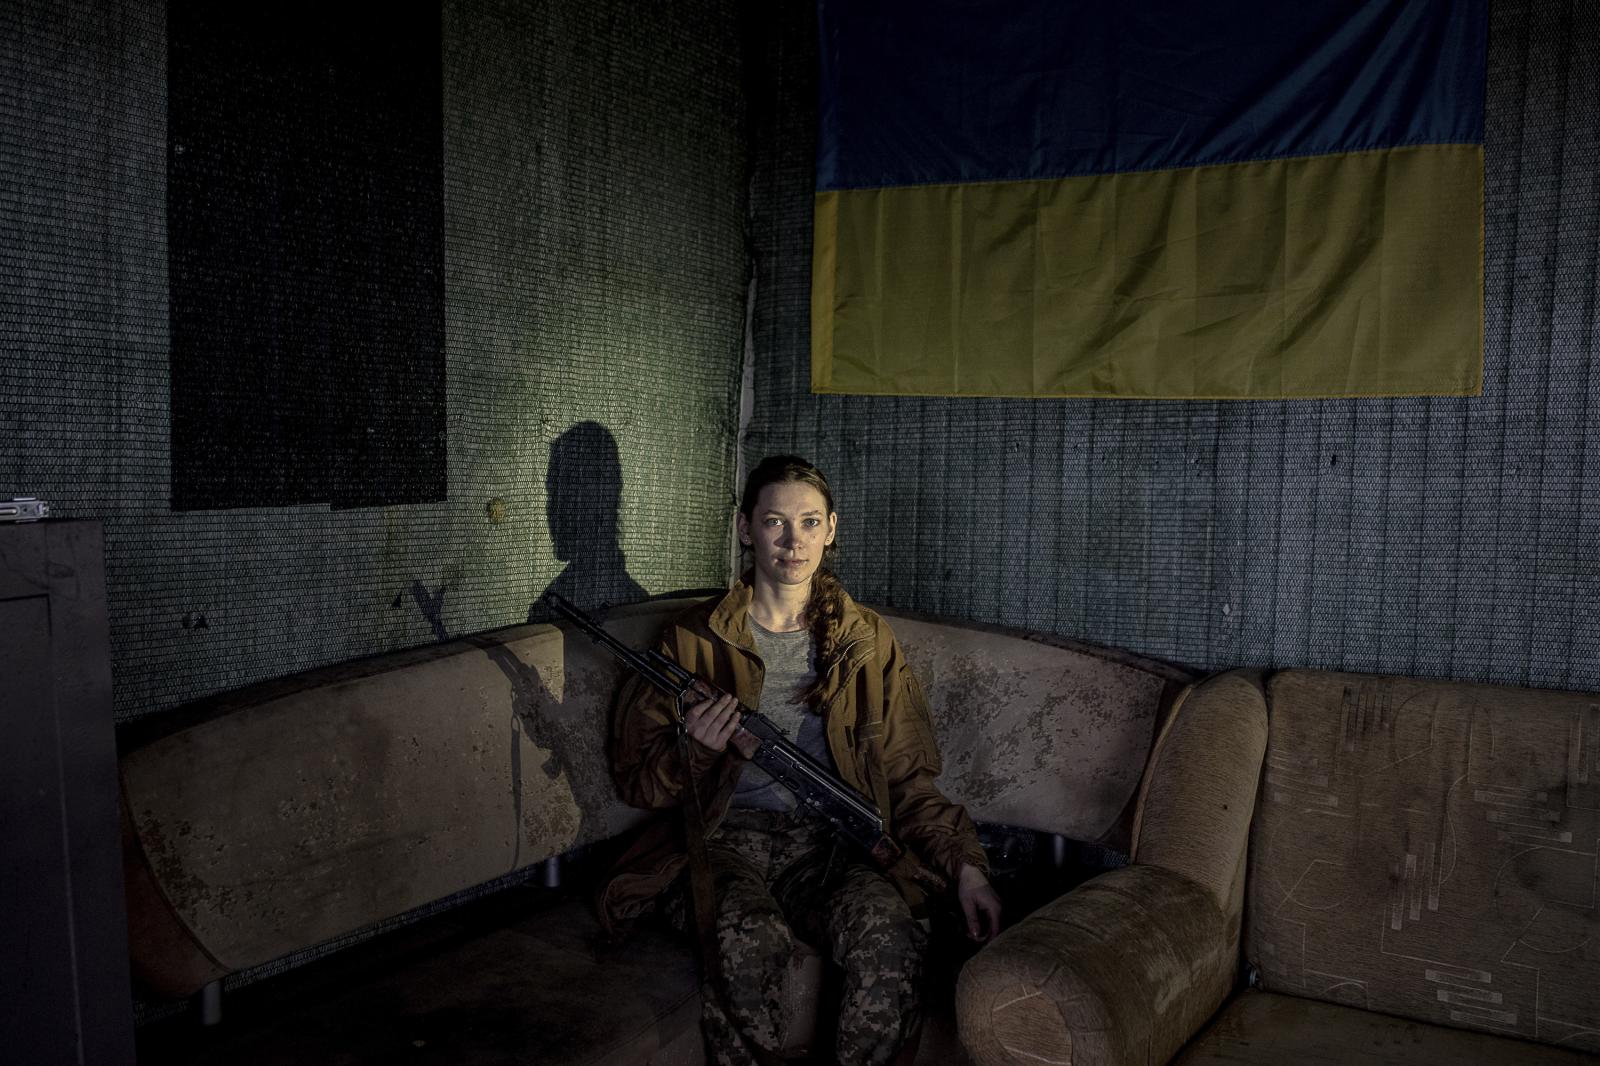 Defenders in training: empowering Ukrainian civilians amidst ongoing war - KYIV REGION, UKRAINE - July 22, 2023: Portrait of a young...